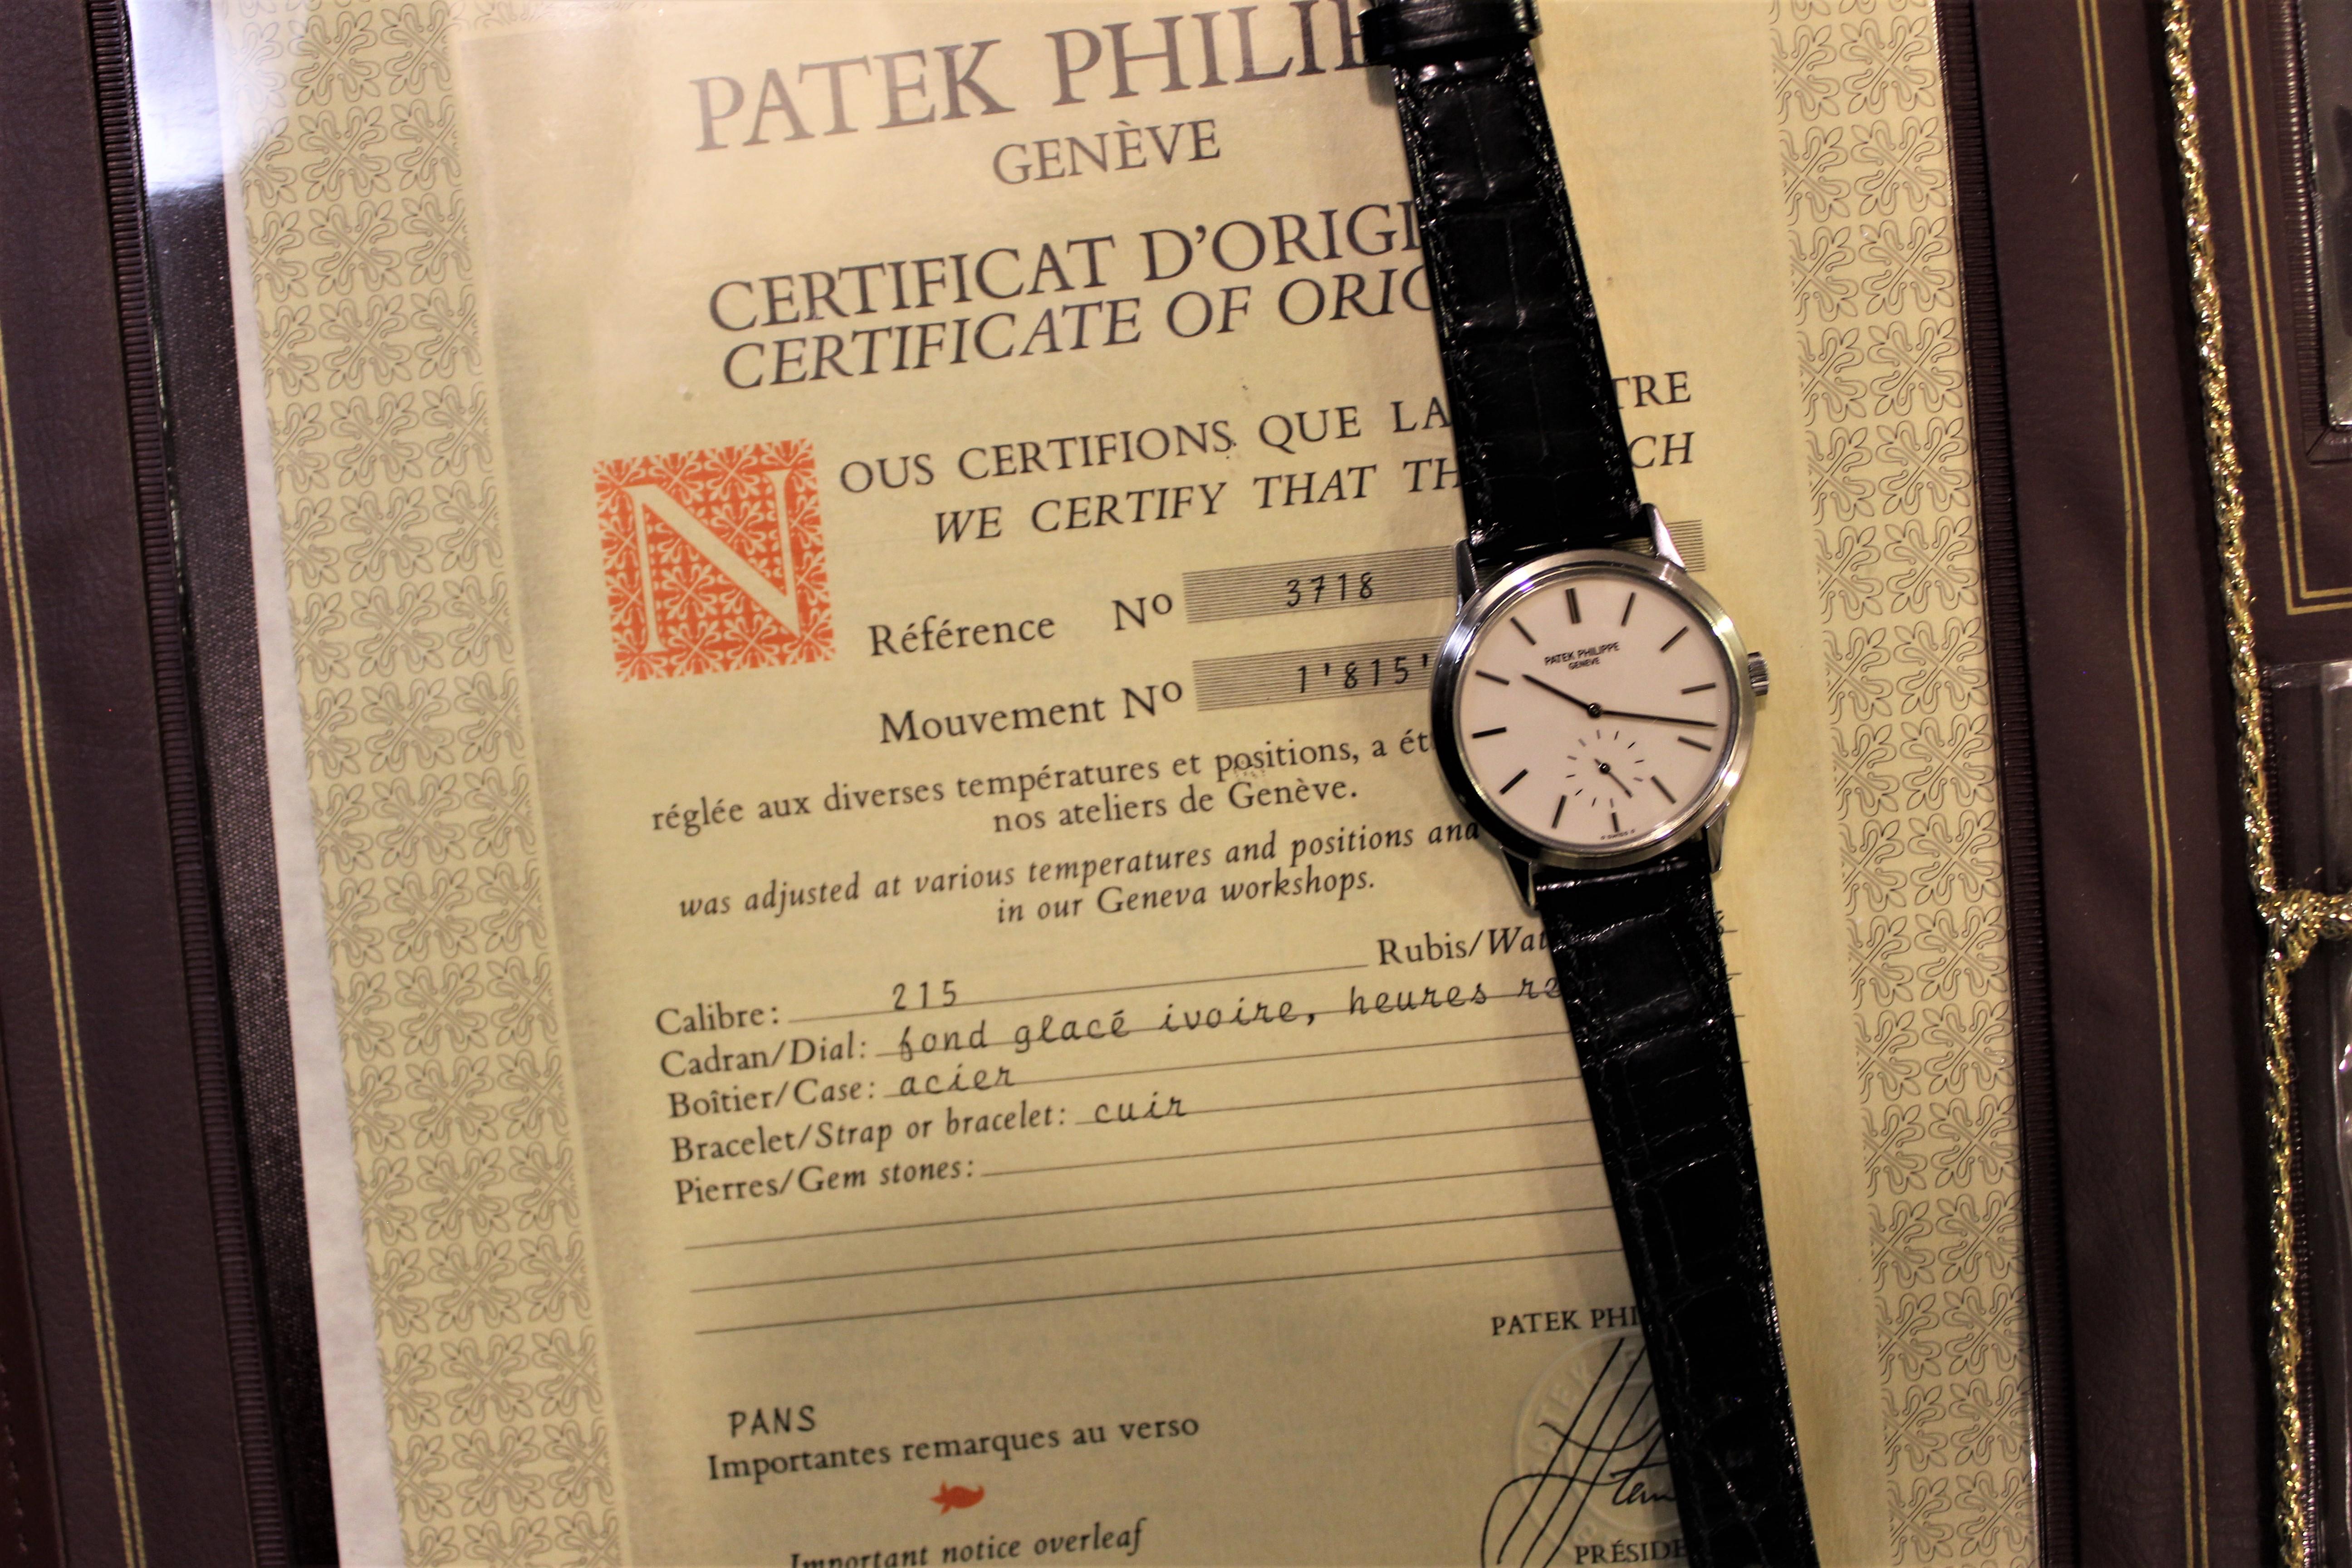 Patek Philippe 3718A Stainless Steel Watch, Made for the Japanese Market 8